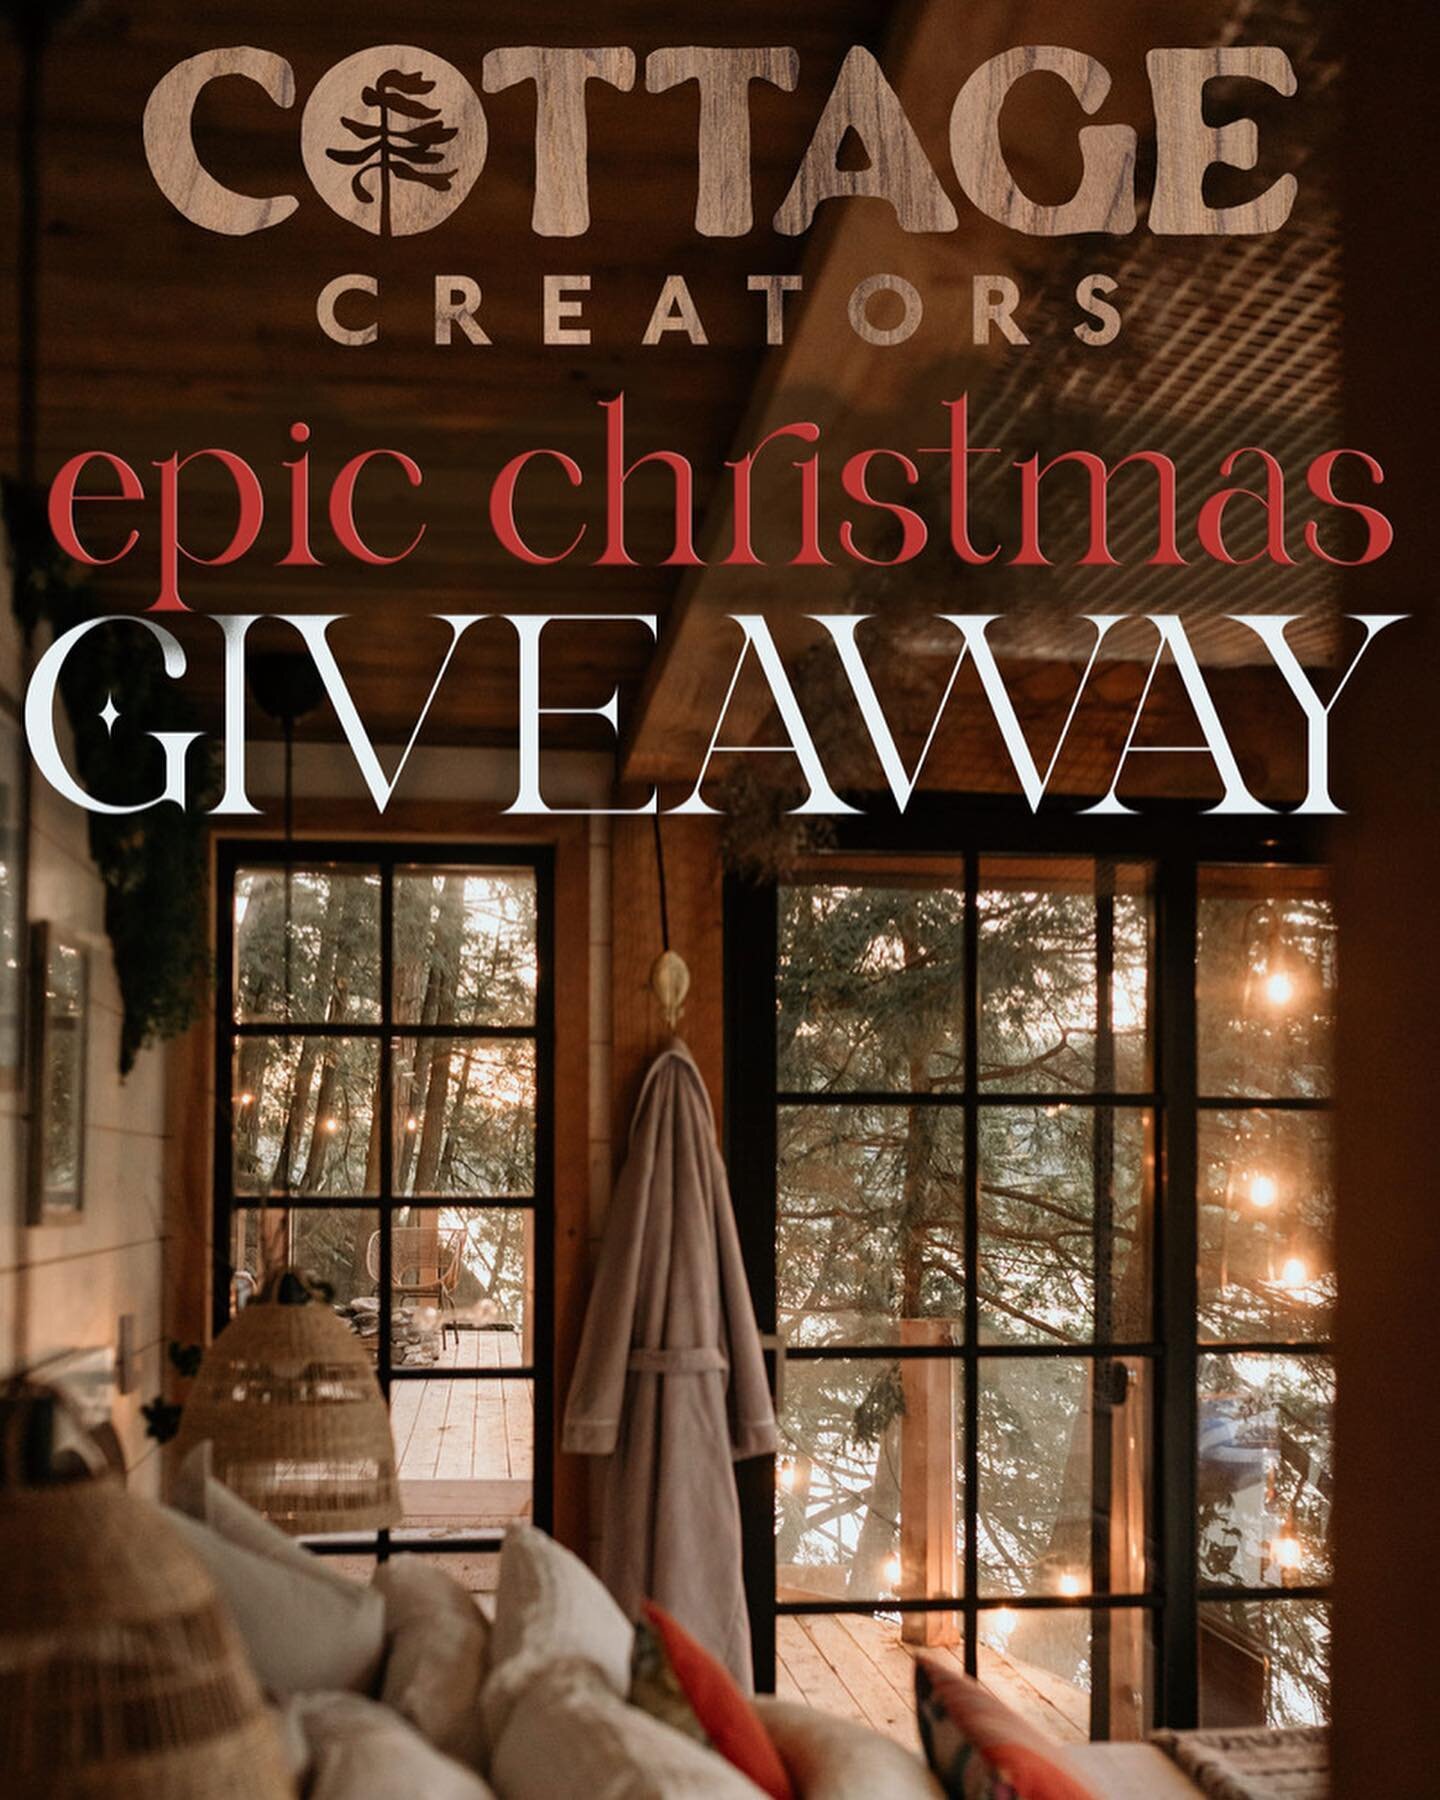 ENTER TO WIN Ontario&rsquo;s most EPIC 
❄️$3k CHRISTMAS GIVEAWAY!❄️

We&rsquo;re celebrating the Holiday season by giving away a Holiday package like no other - including a 2 night stay at the coziest cottage in Ontario!

WIN:
&bull; 2 night stay at 